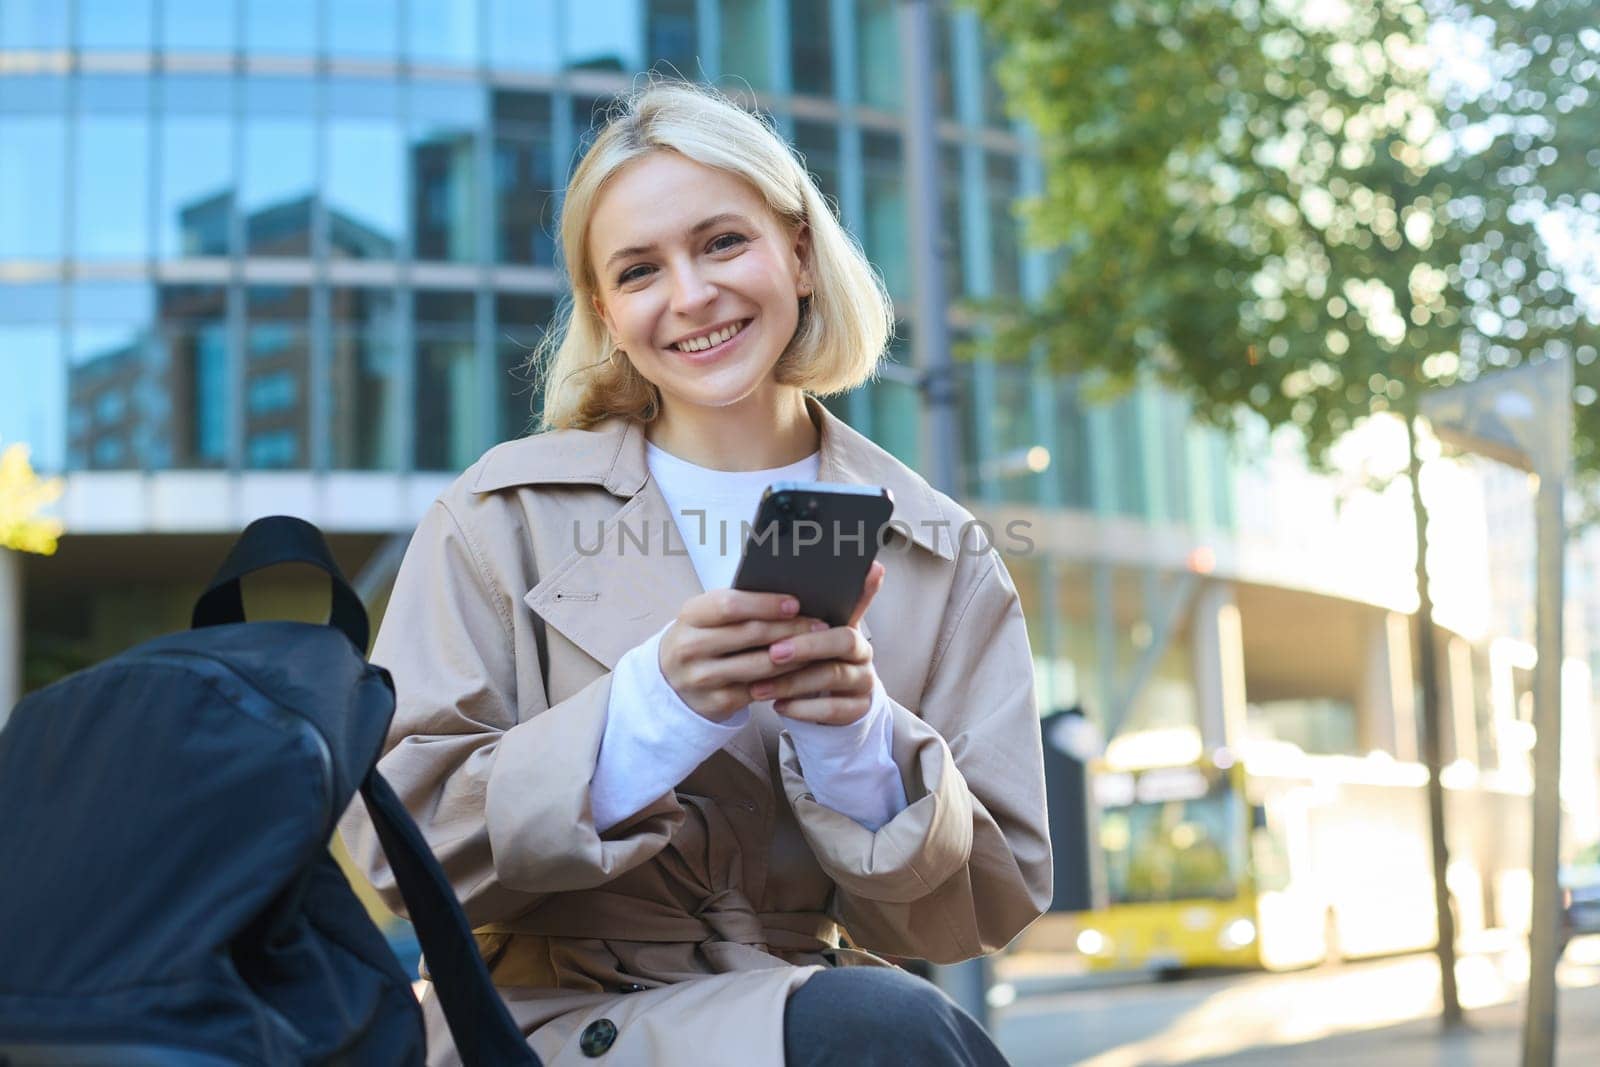 Lifestyle portrait of cute blonde girl with smartphone, sitting on bench with backpack, using mobile phone, reading message.